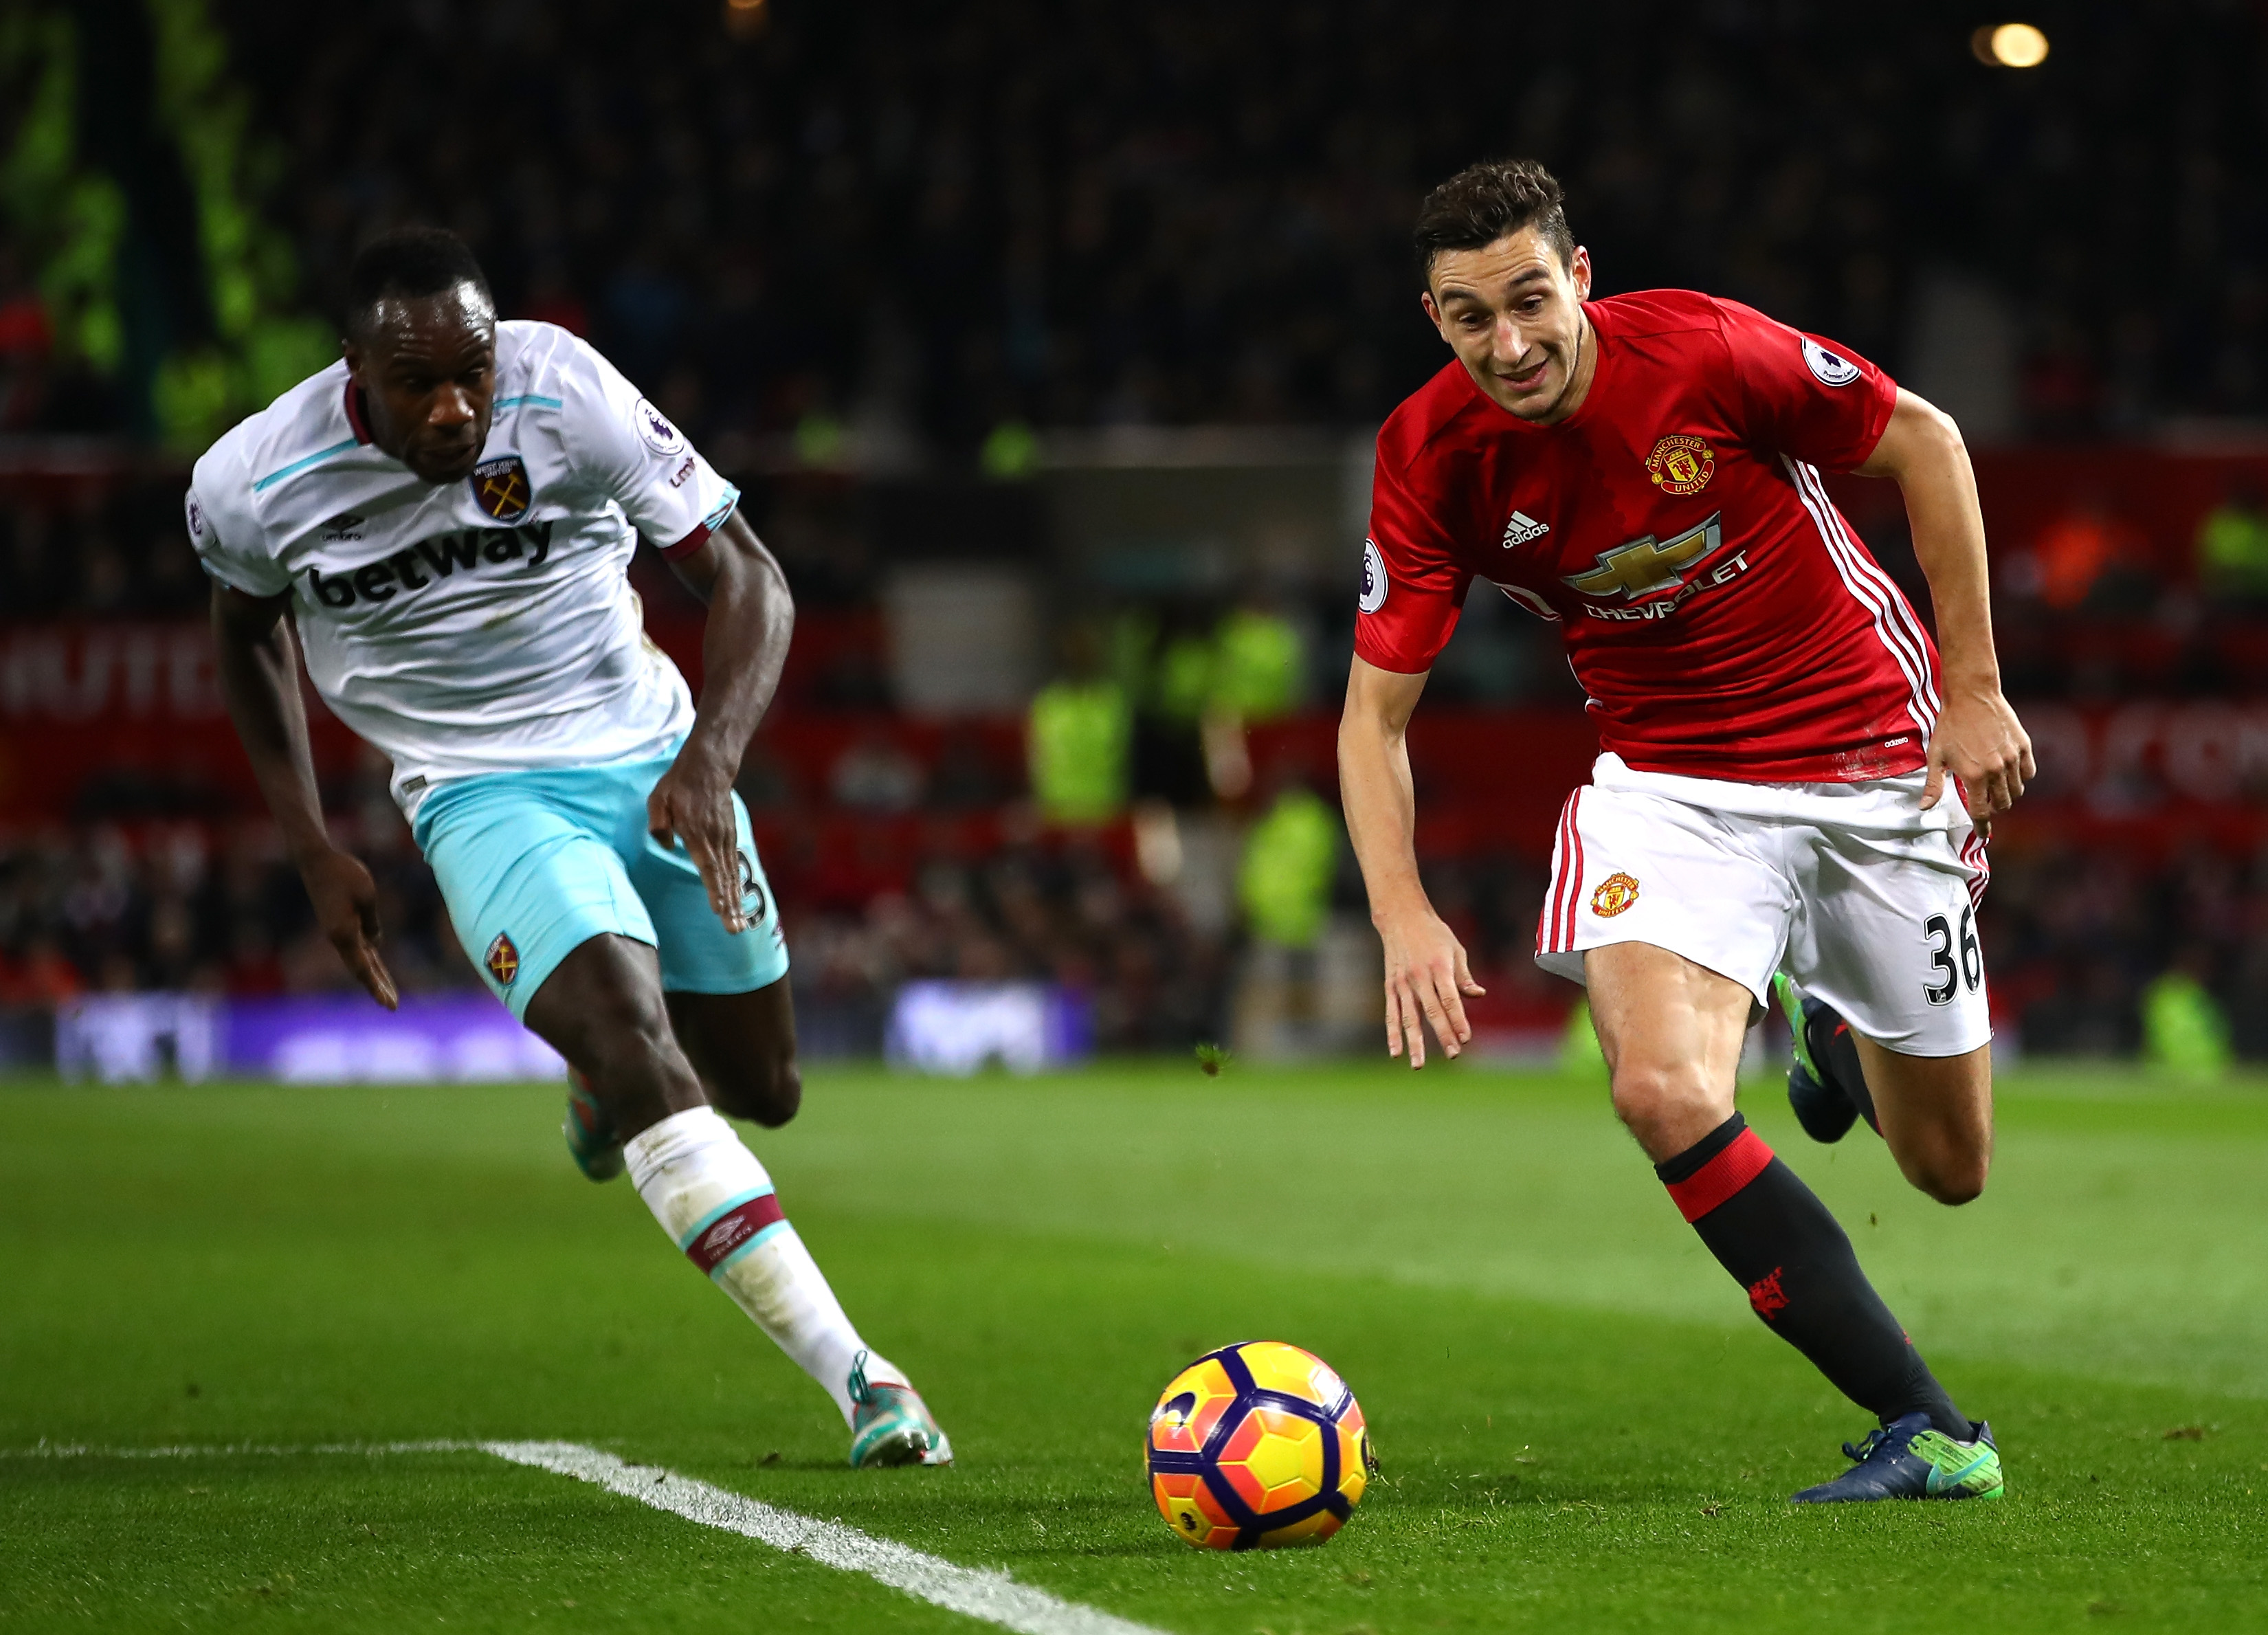 MANCHESTER, ENGLAND - NOVEMBER 27: Michail Antonio of West Ham United (L) and Matteo Darmian of Manchester United (R) chase after the ball during the Premier League match between Manchester United and West Ham United at Old Trafford on November 27, 2016 in Manchester, England.  (Photo by Clive Brunskill/Getty Images)